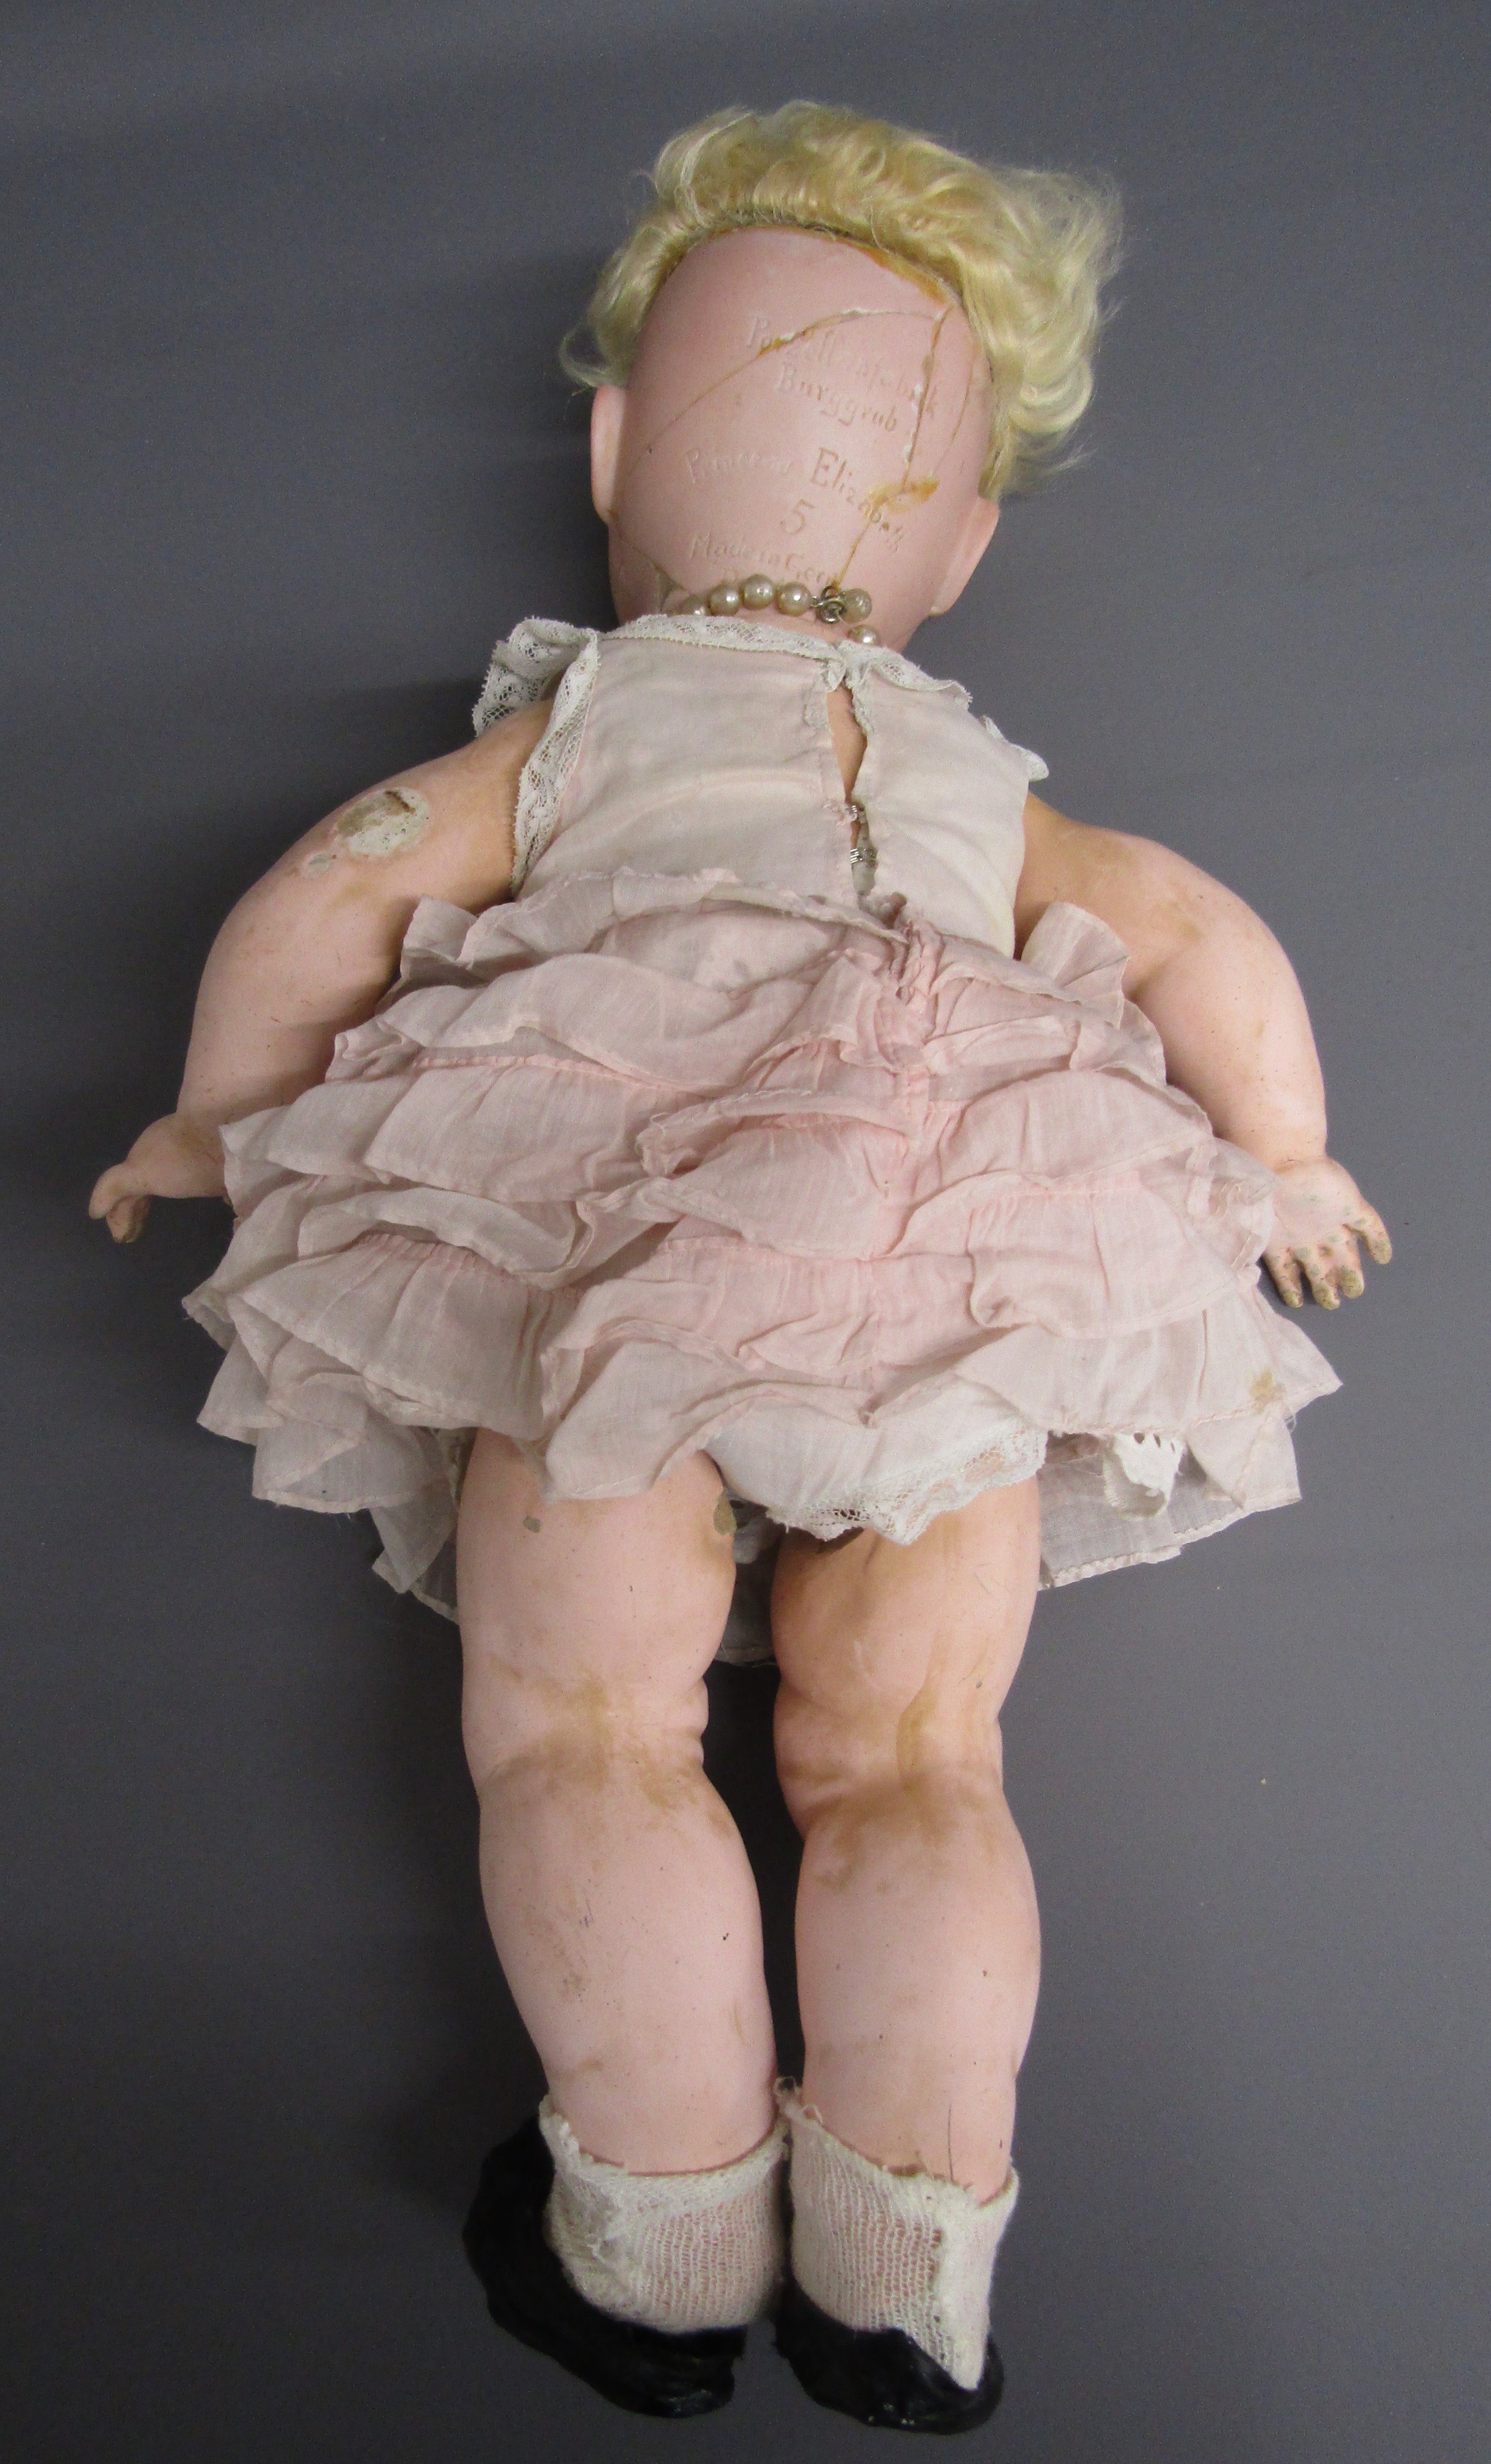 Schoenau and Hoffmeister bisque head 'Princess Elizabeth' doll with original frilly dress and - Image 8 of 8